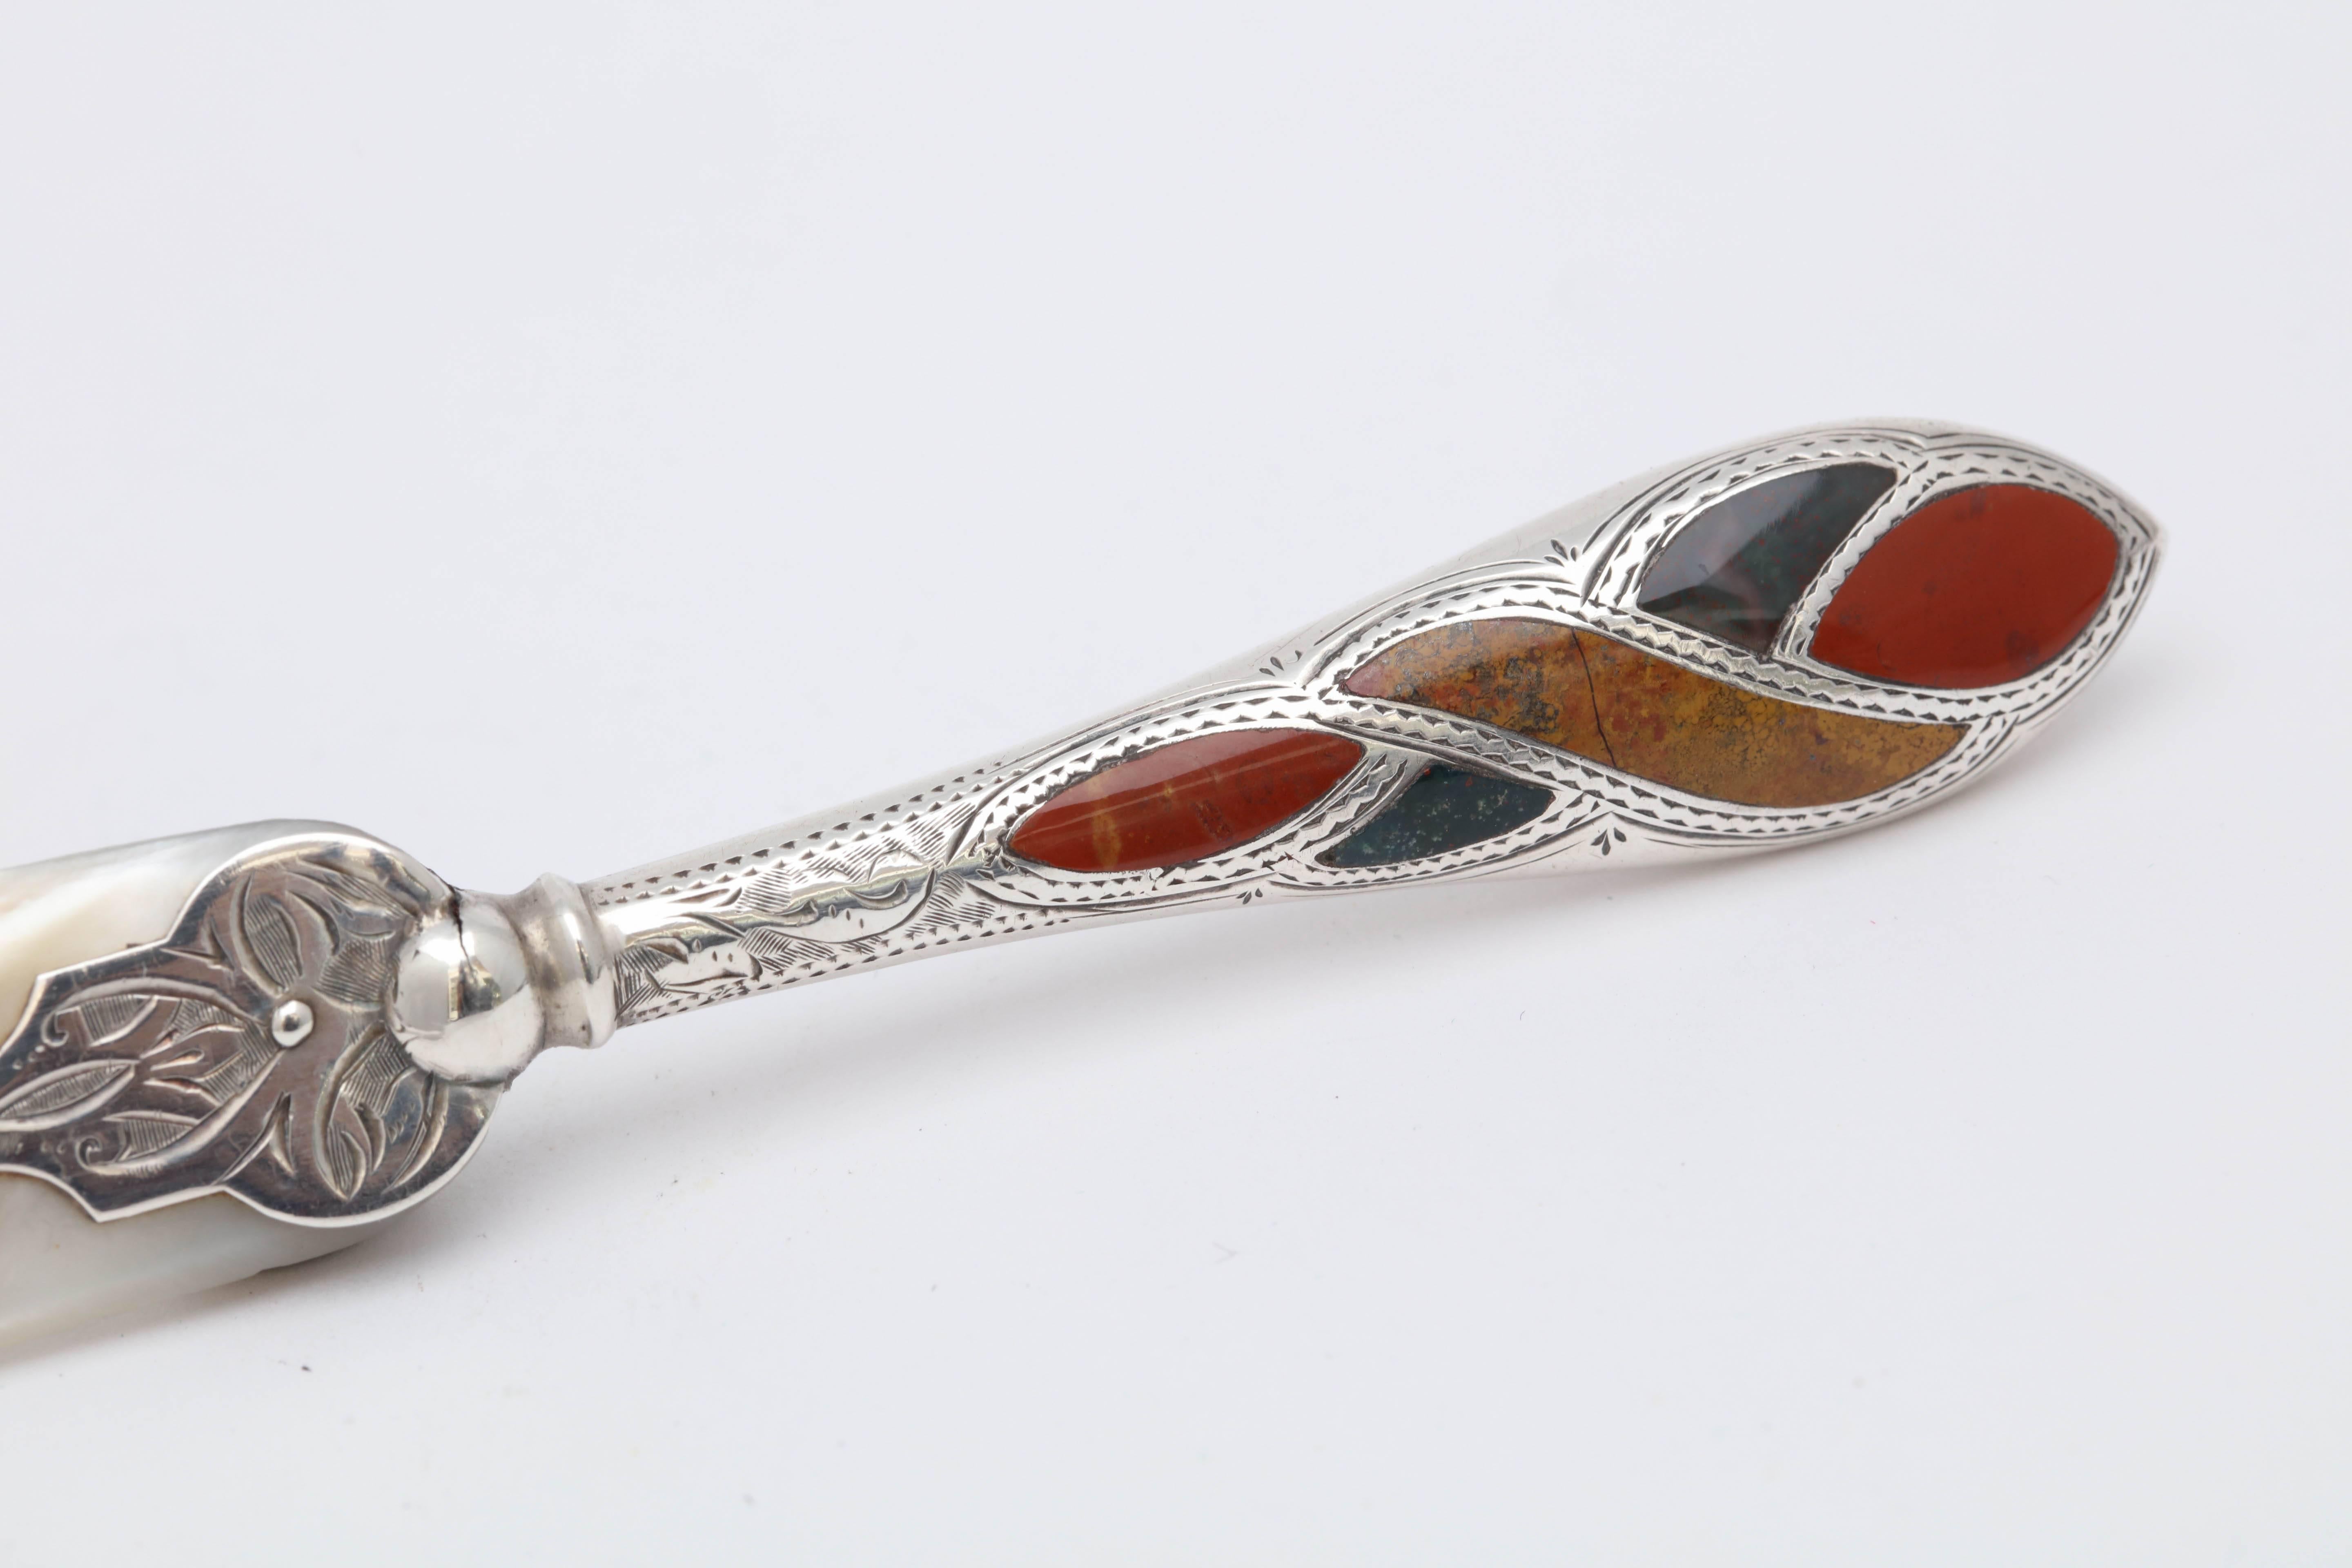 Rare, beautiful, Victorian, sterling silver and Scottish agate-mounted letter opener, Birmingham, England, 1895, Adie and Lovekin - makers. Lovely Celtic designs on silver. Measures: 7 inches long x 1 inch deep (at widest point) x 1/4 inch high.